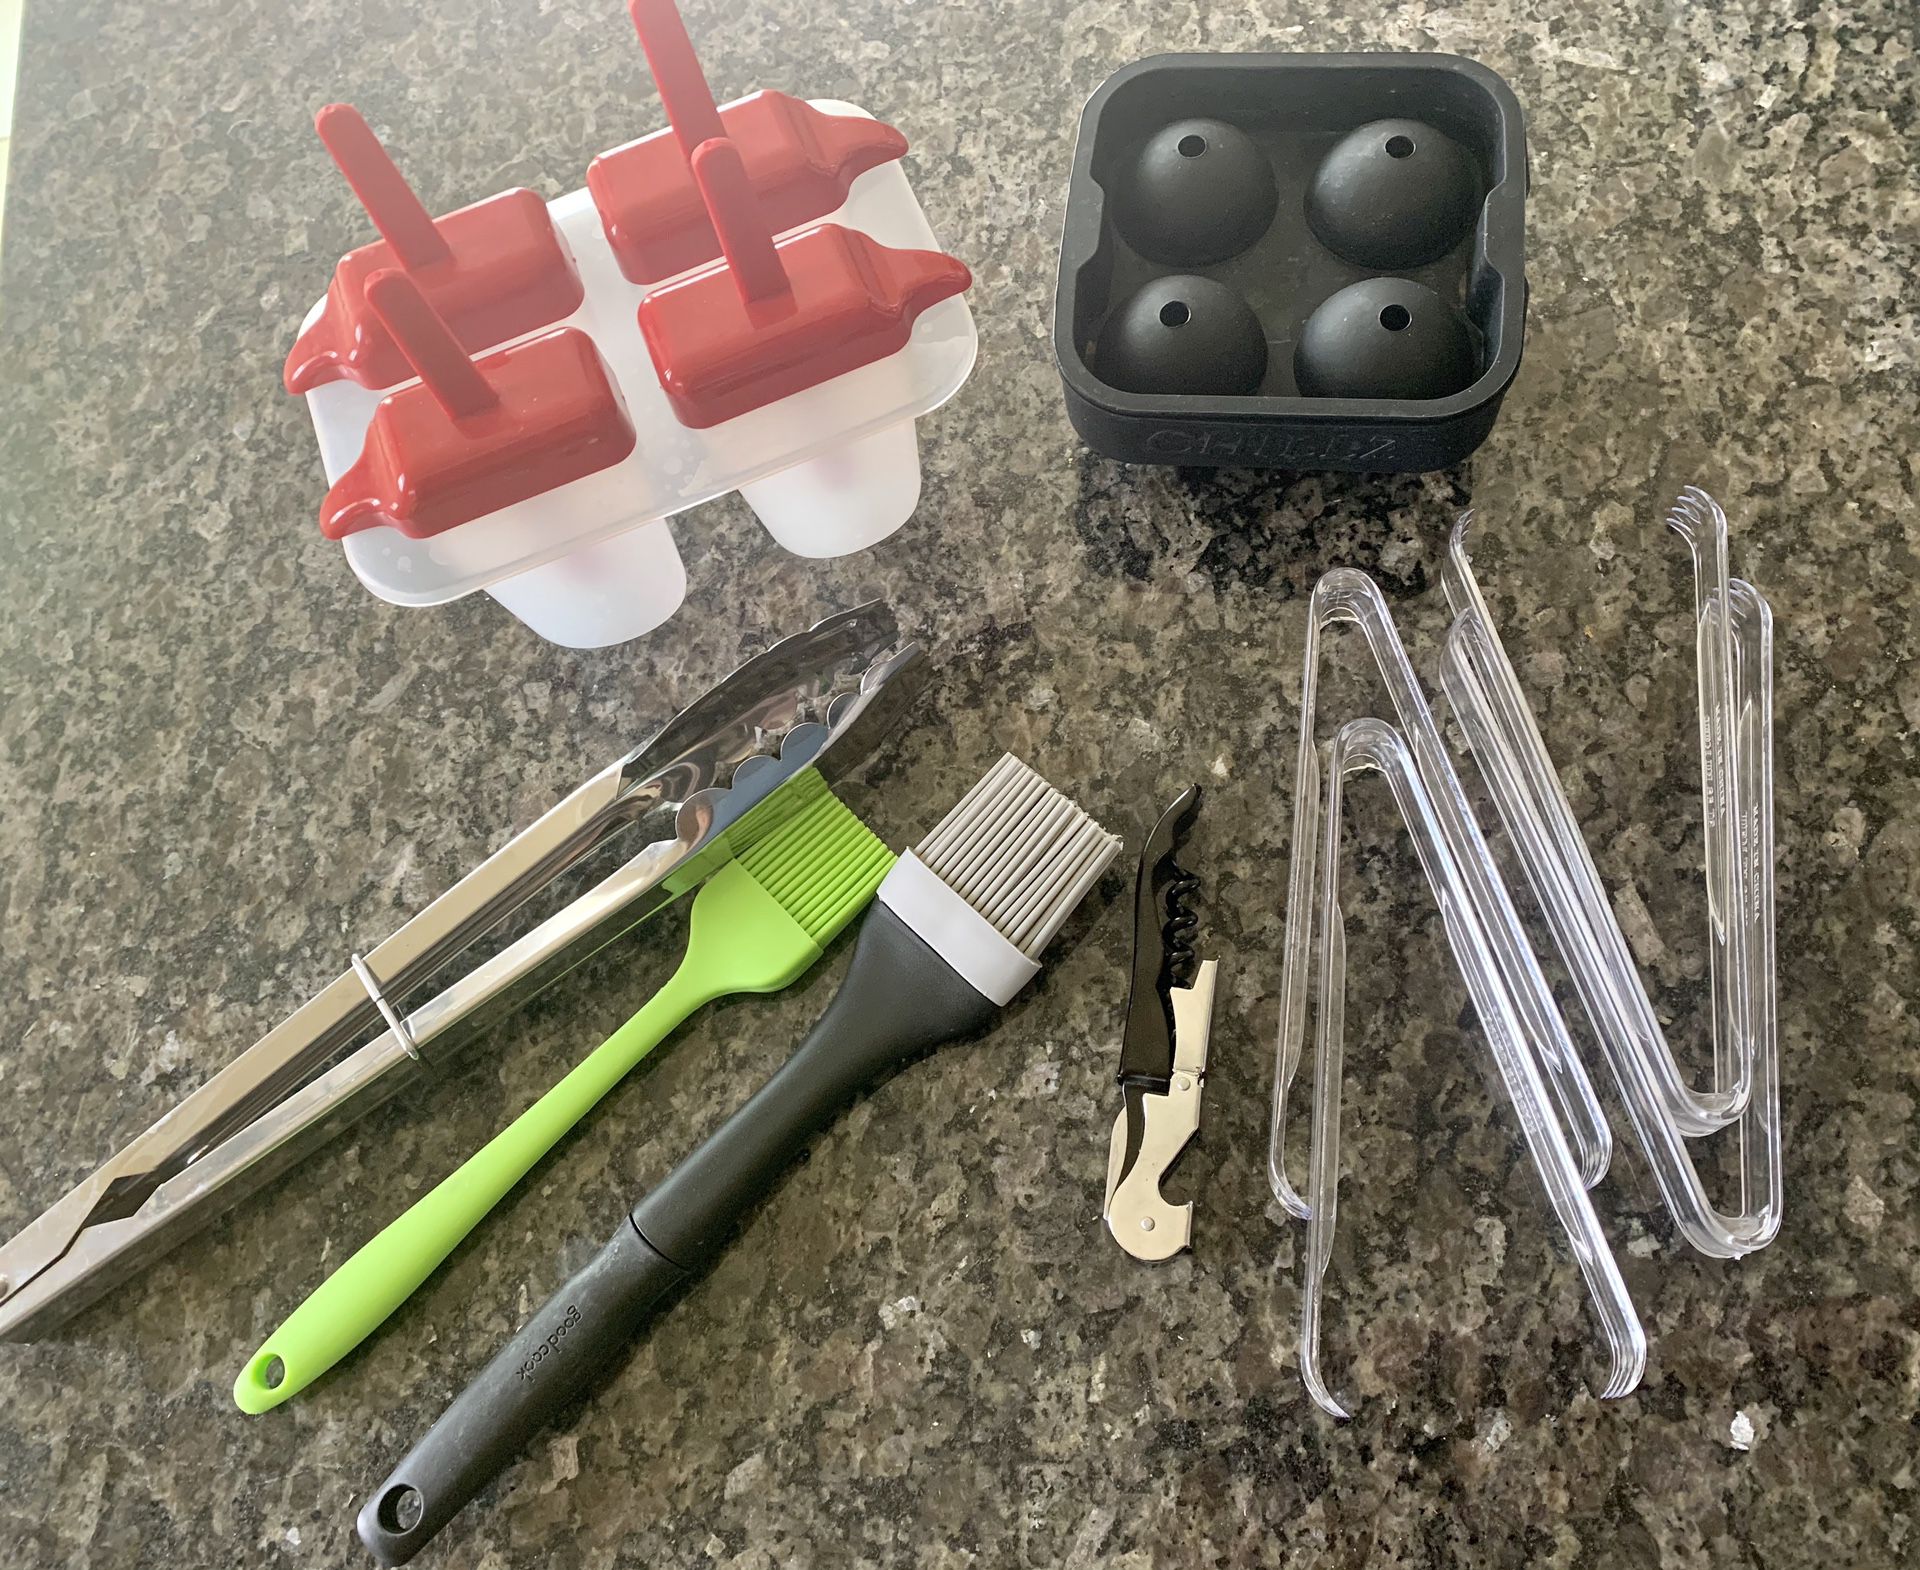 Misc. kitchen gadgets (all 3 pics are included)